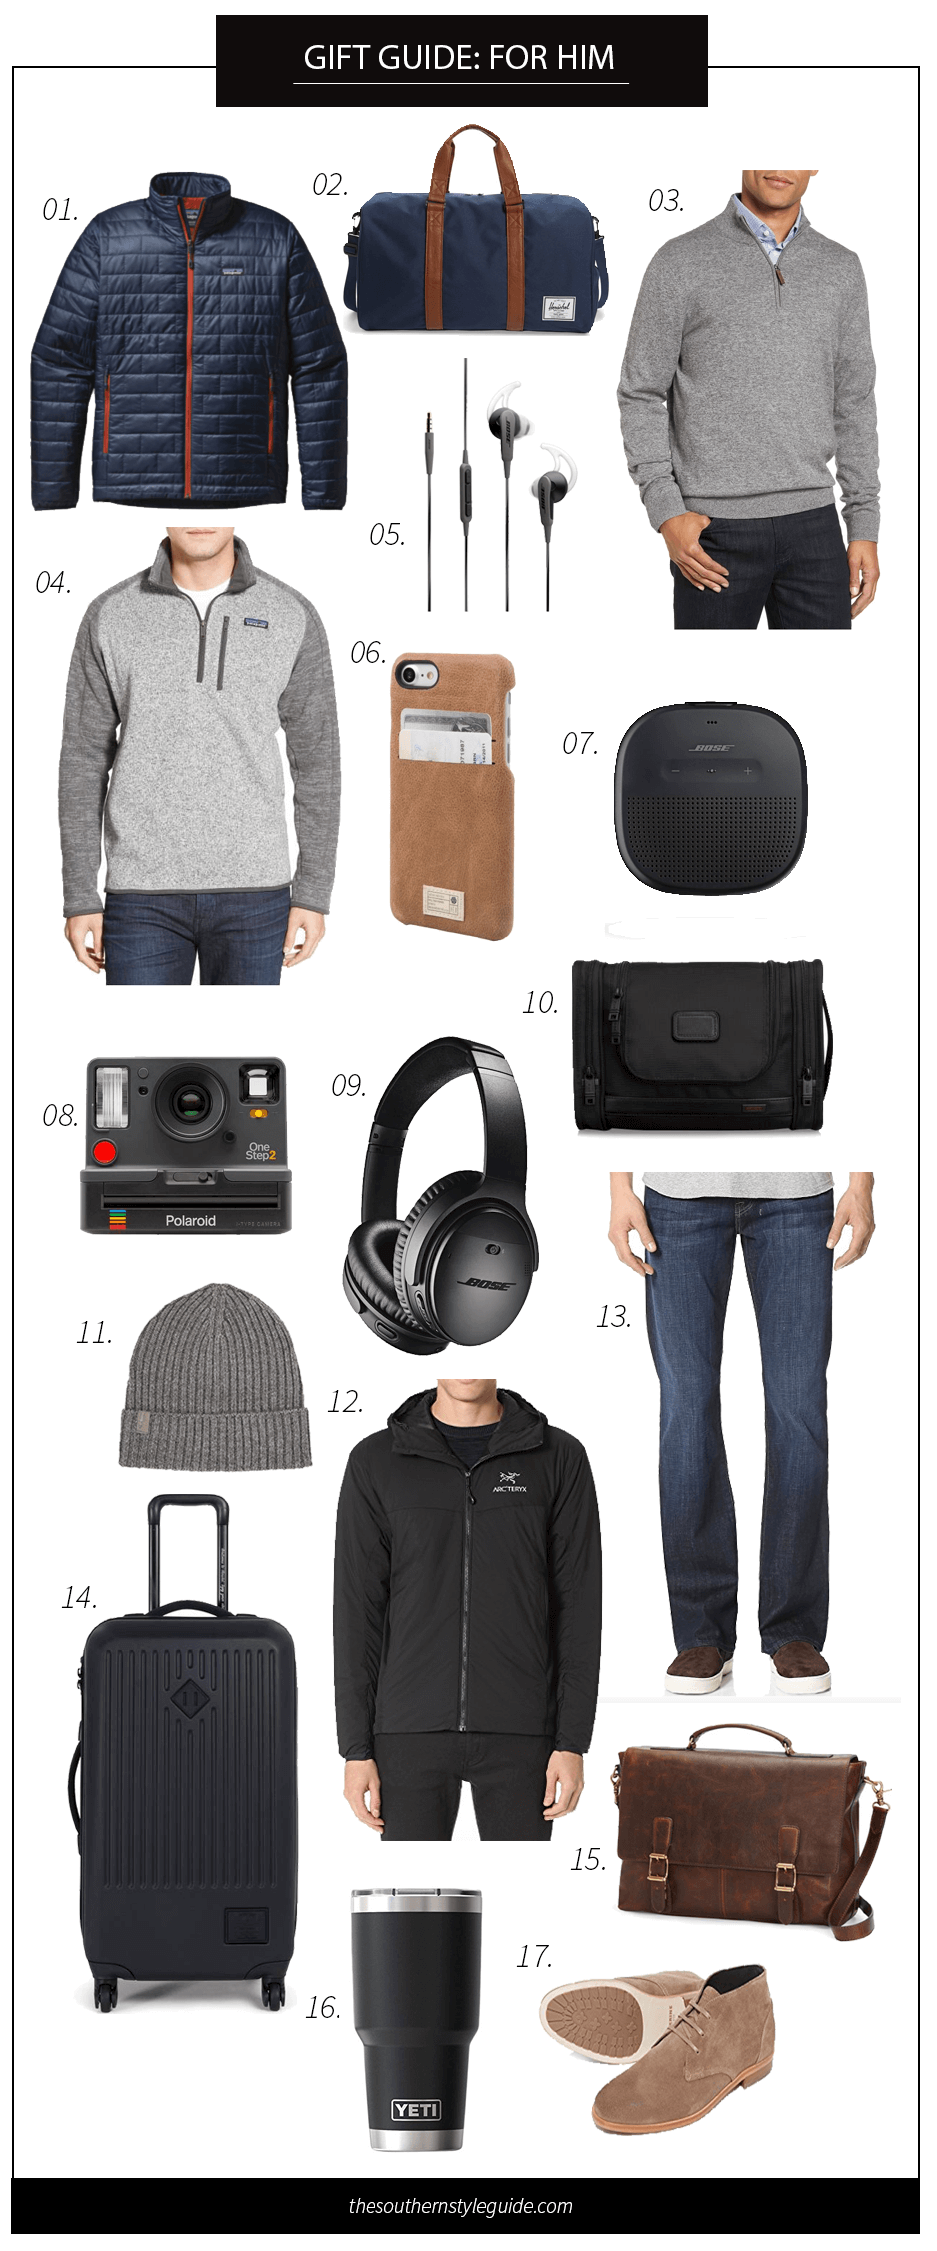 Gift Guide, For Him, Men, Christmas, Holiday